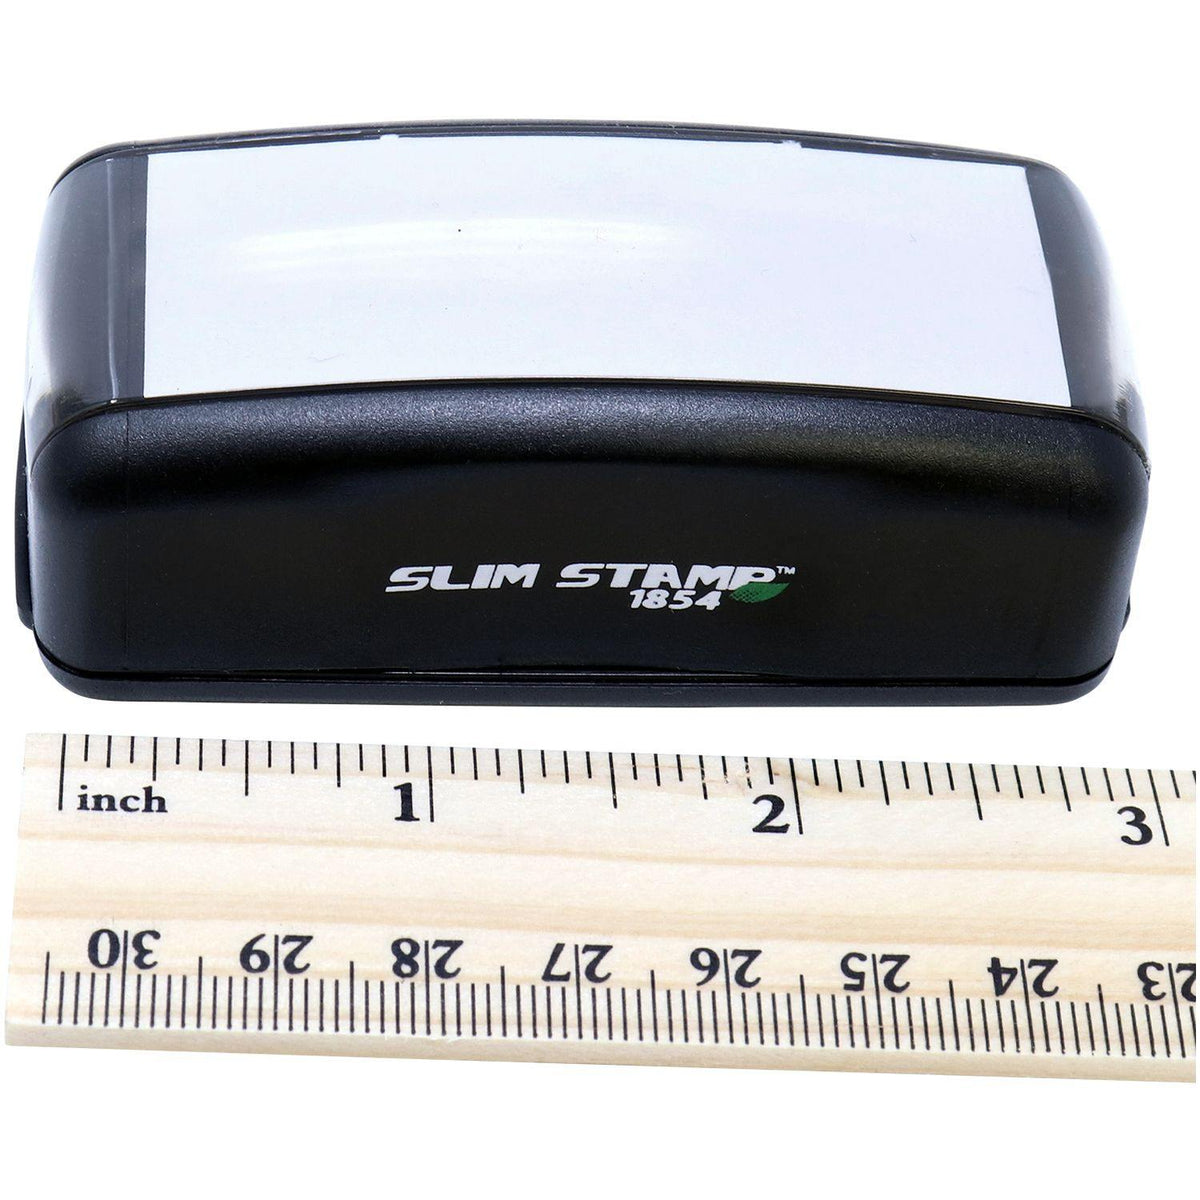 Measurement Large Pre-Inked Narrow Confidential Stamp with Ruler